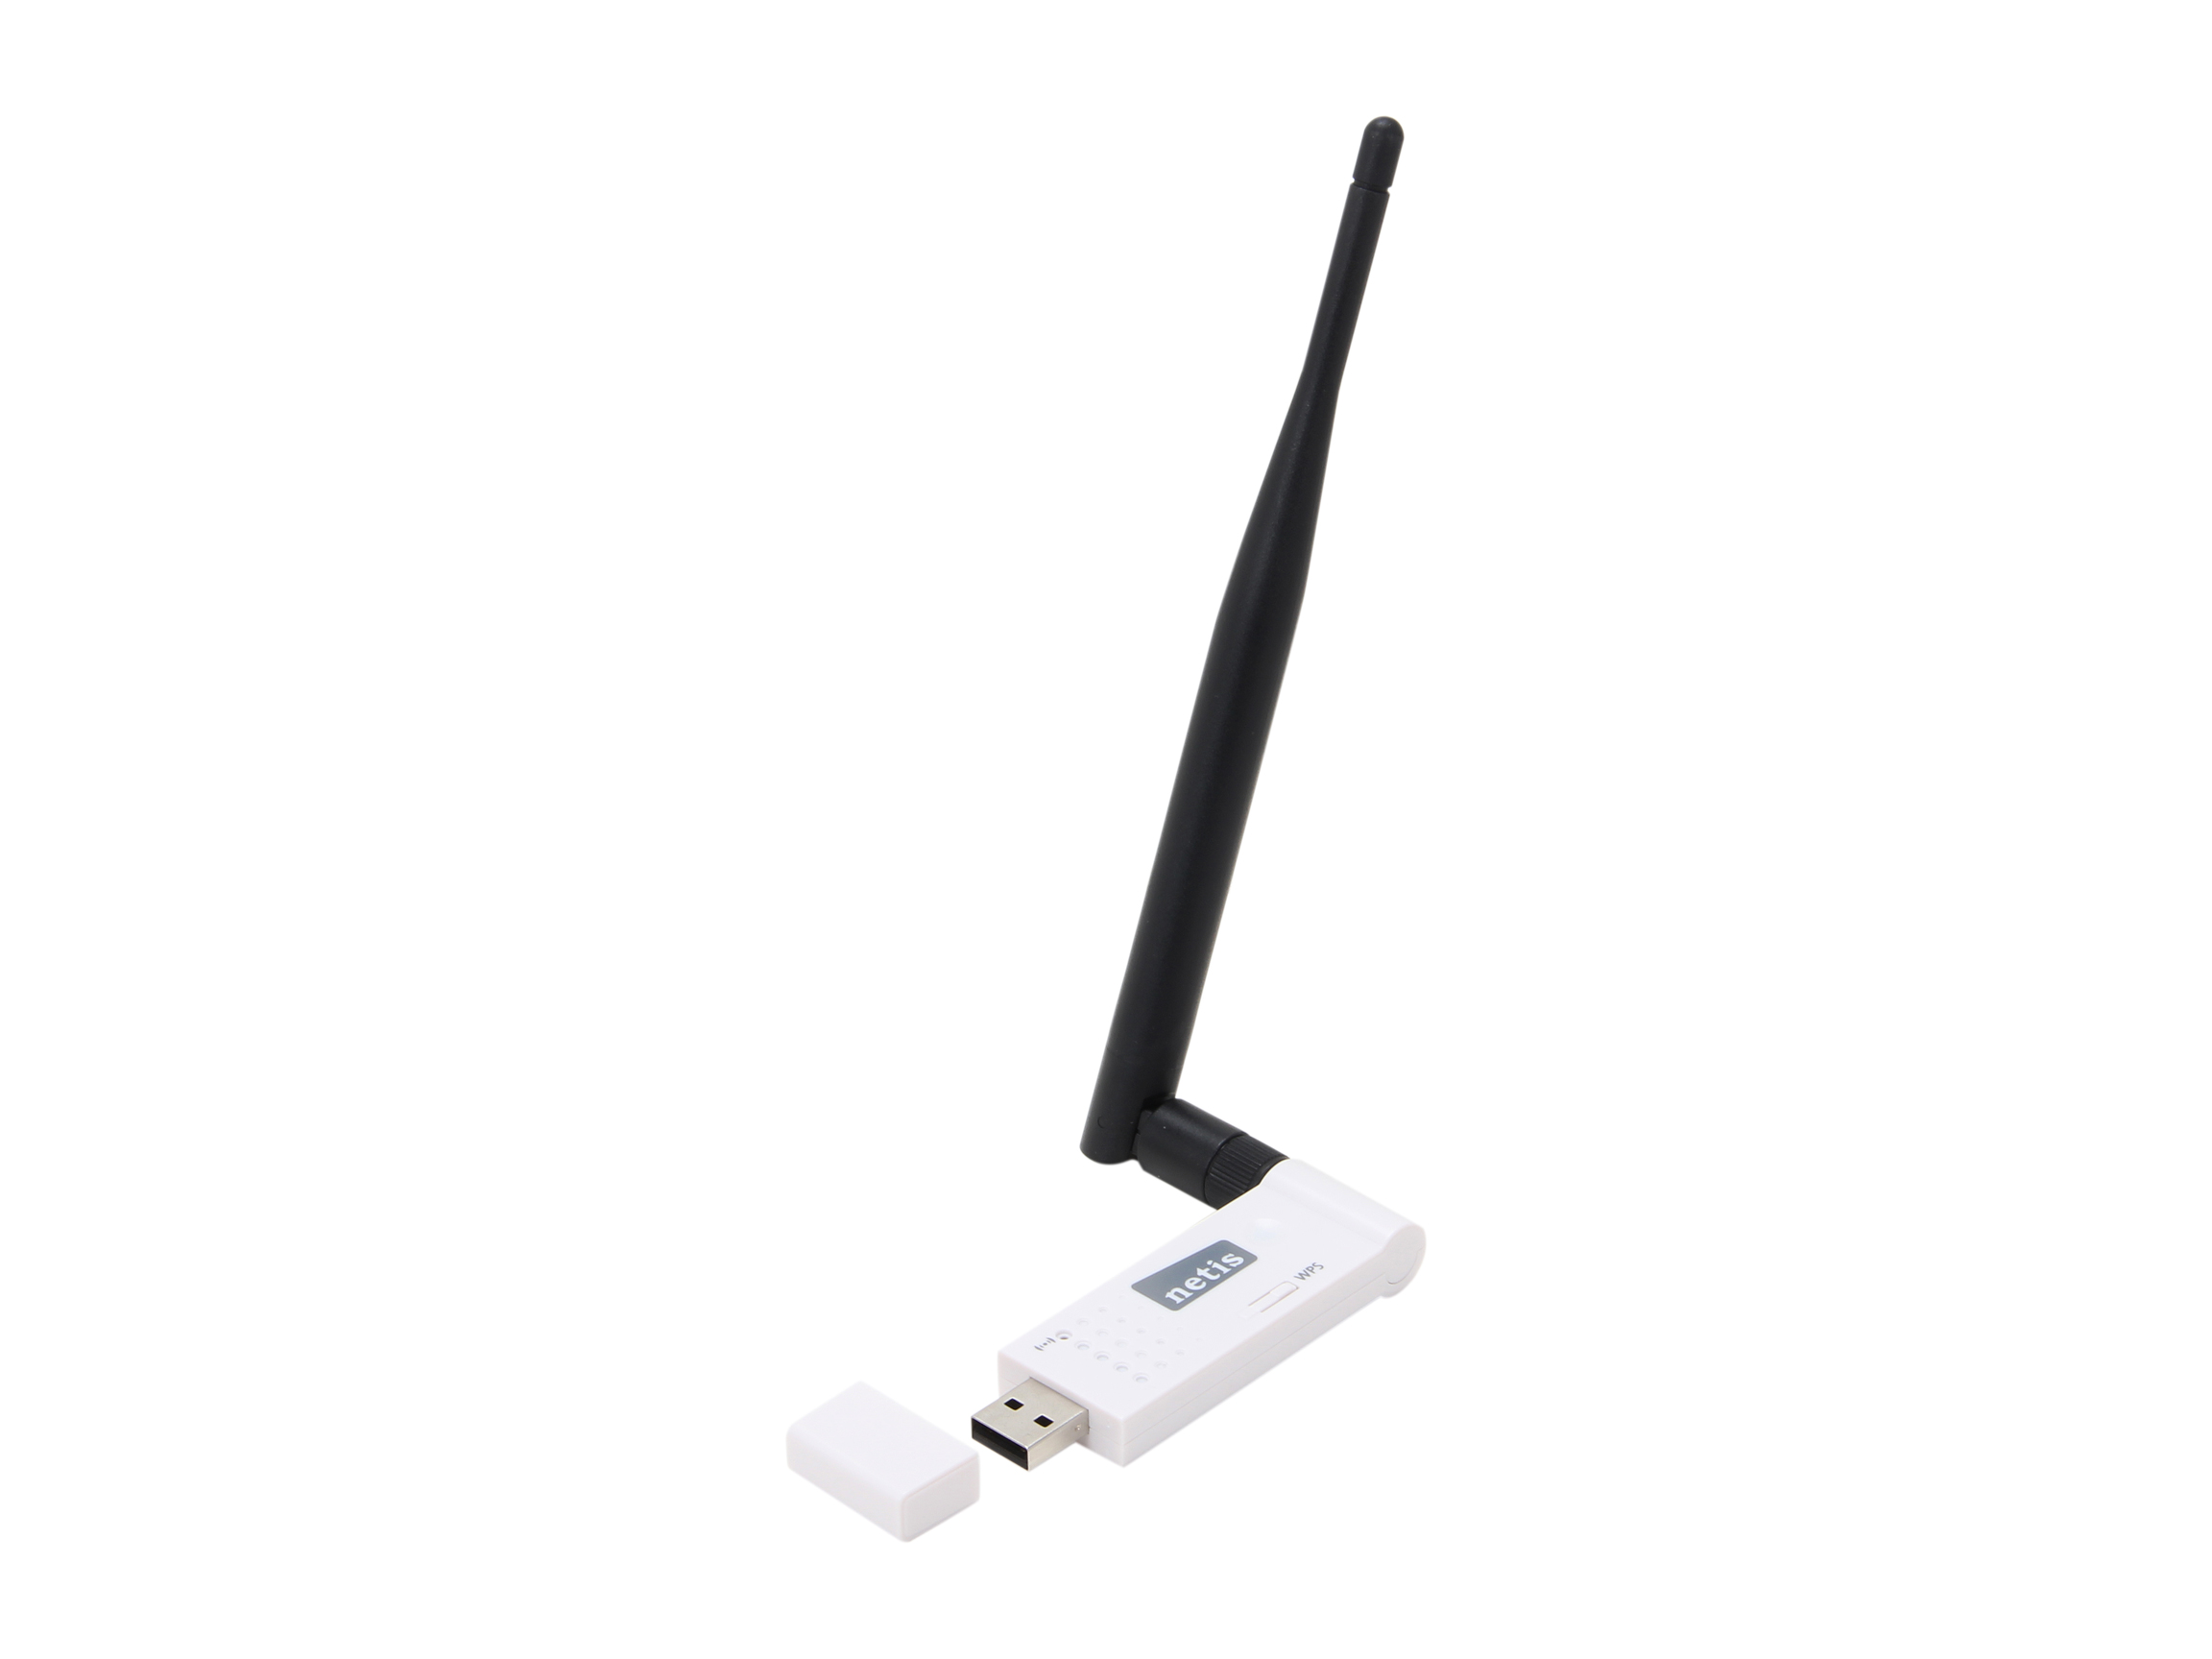 NETIS WF2119 N150 Wireless High Gain USB Adapter with Detachable 5dBi Antenna Compatible with Windows MAC Linux OS